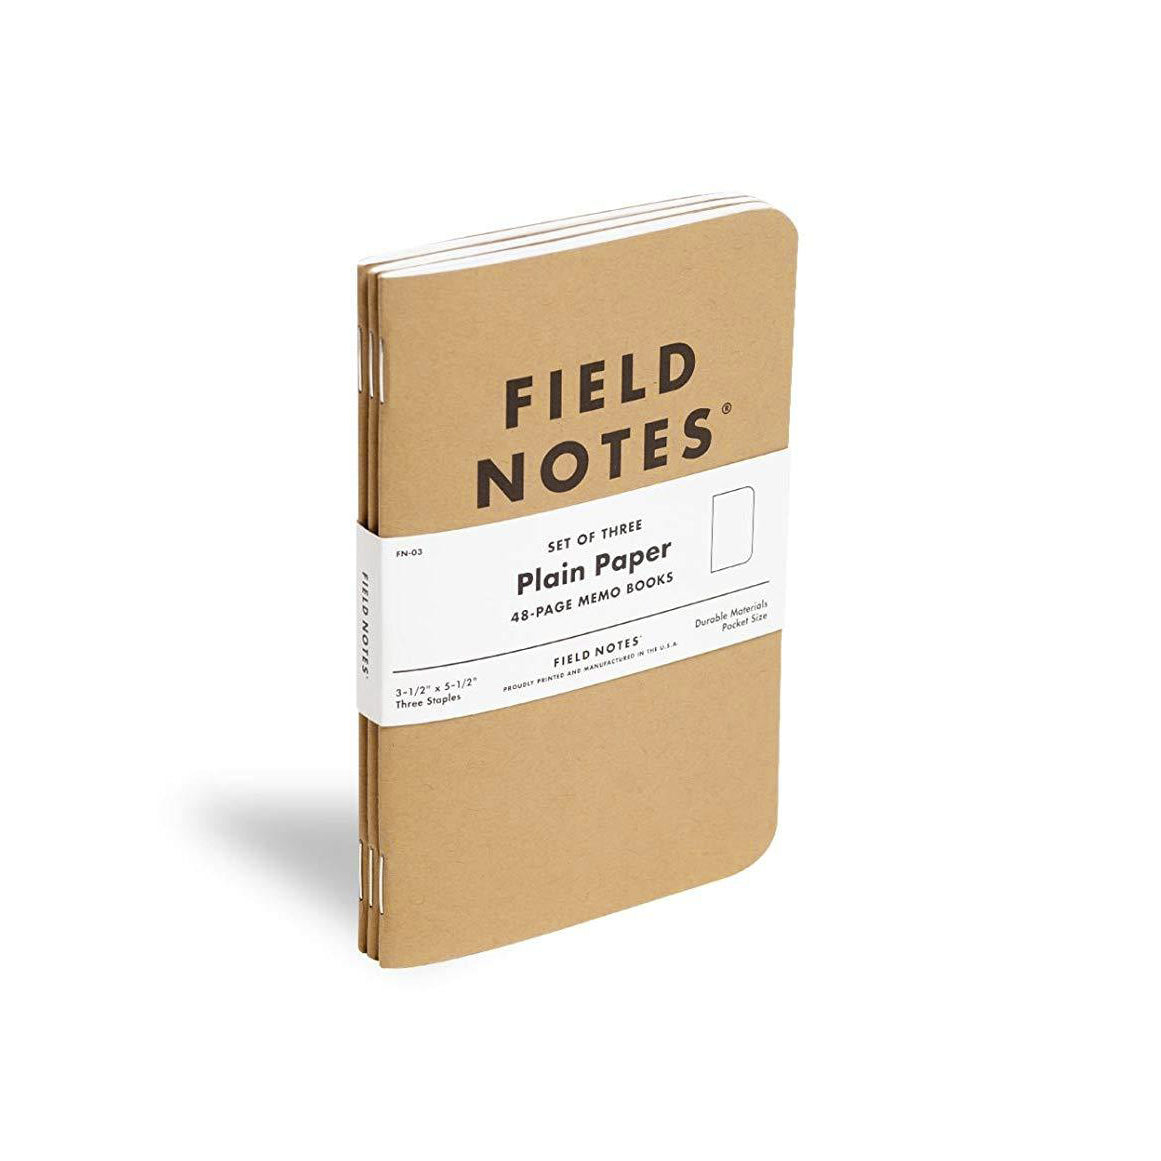 https://redcloudscollective.com/cdn/shop/products/red_clouds_field_notes_1161x.jpg?v=1556415175